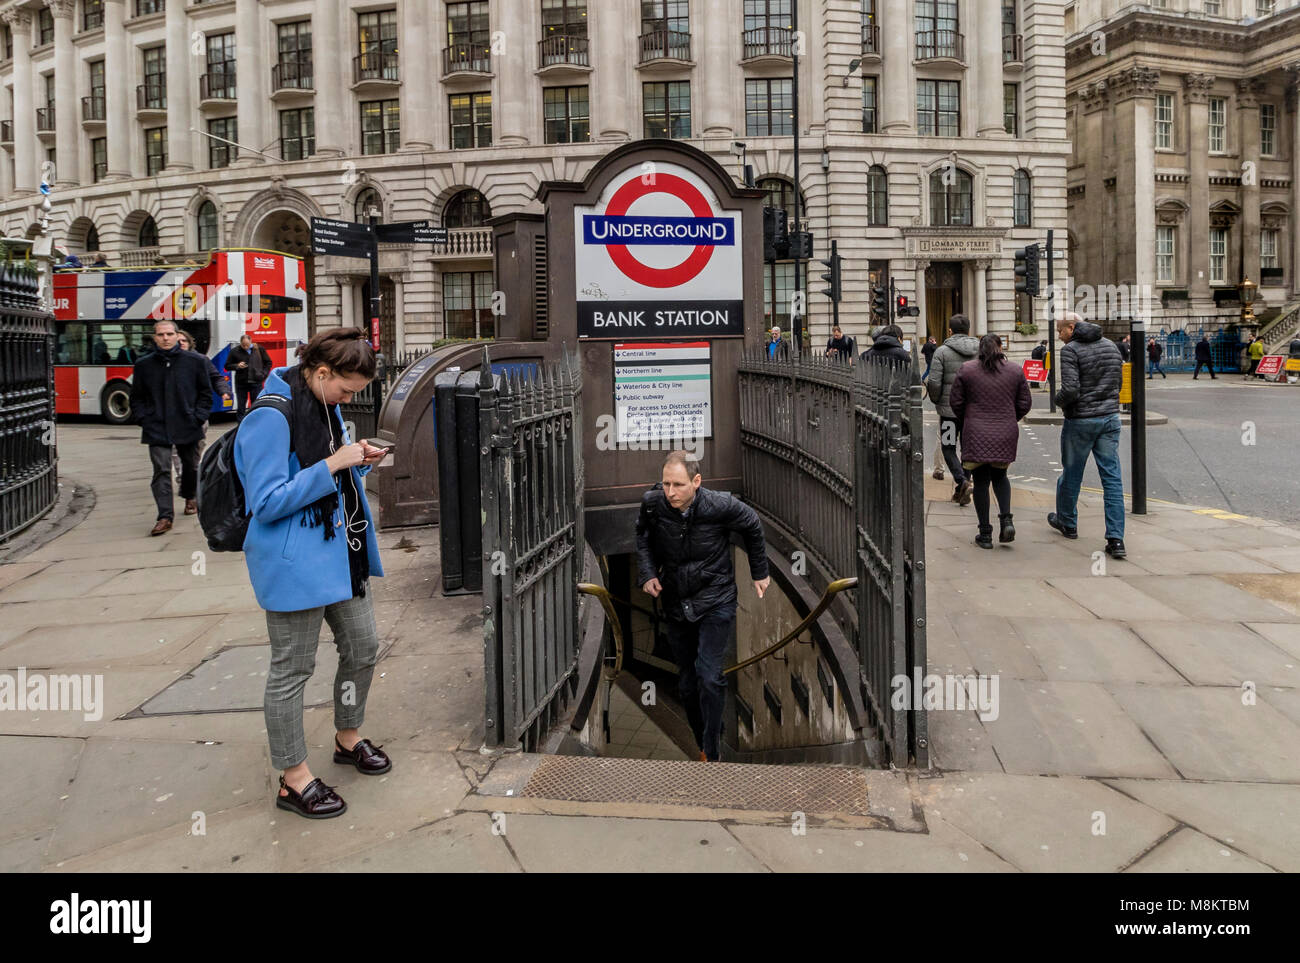 A woman checking her phone outside Bank Tube station entrance in The City Of London as a man rushes up the steps from the underground station entrance Stock Photo